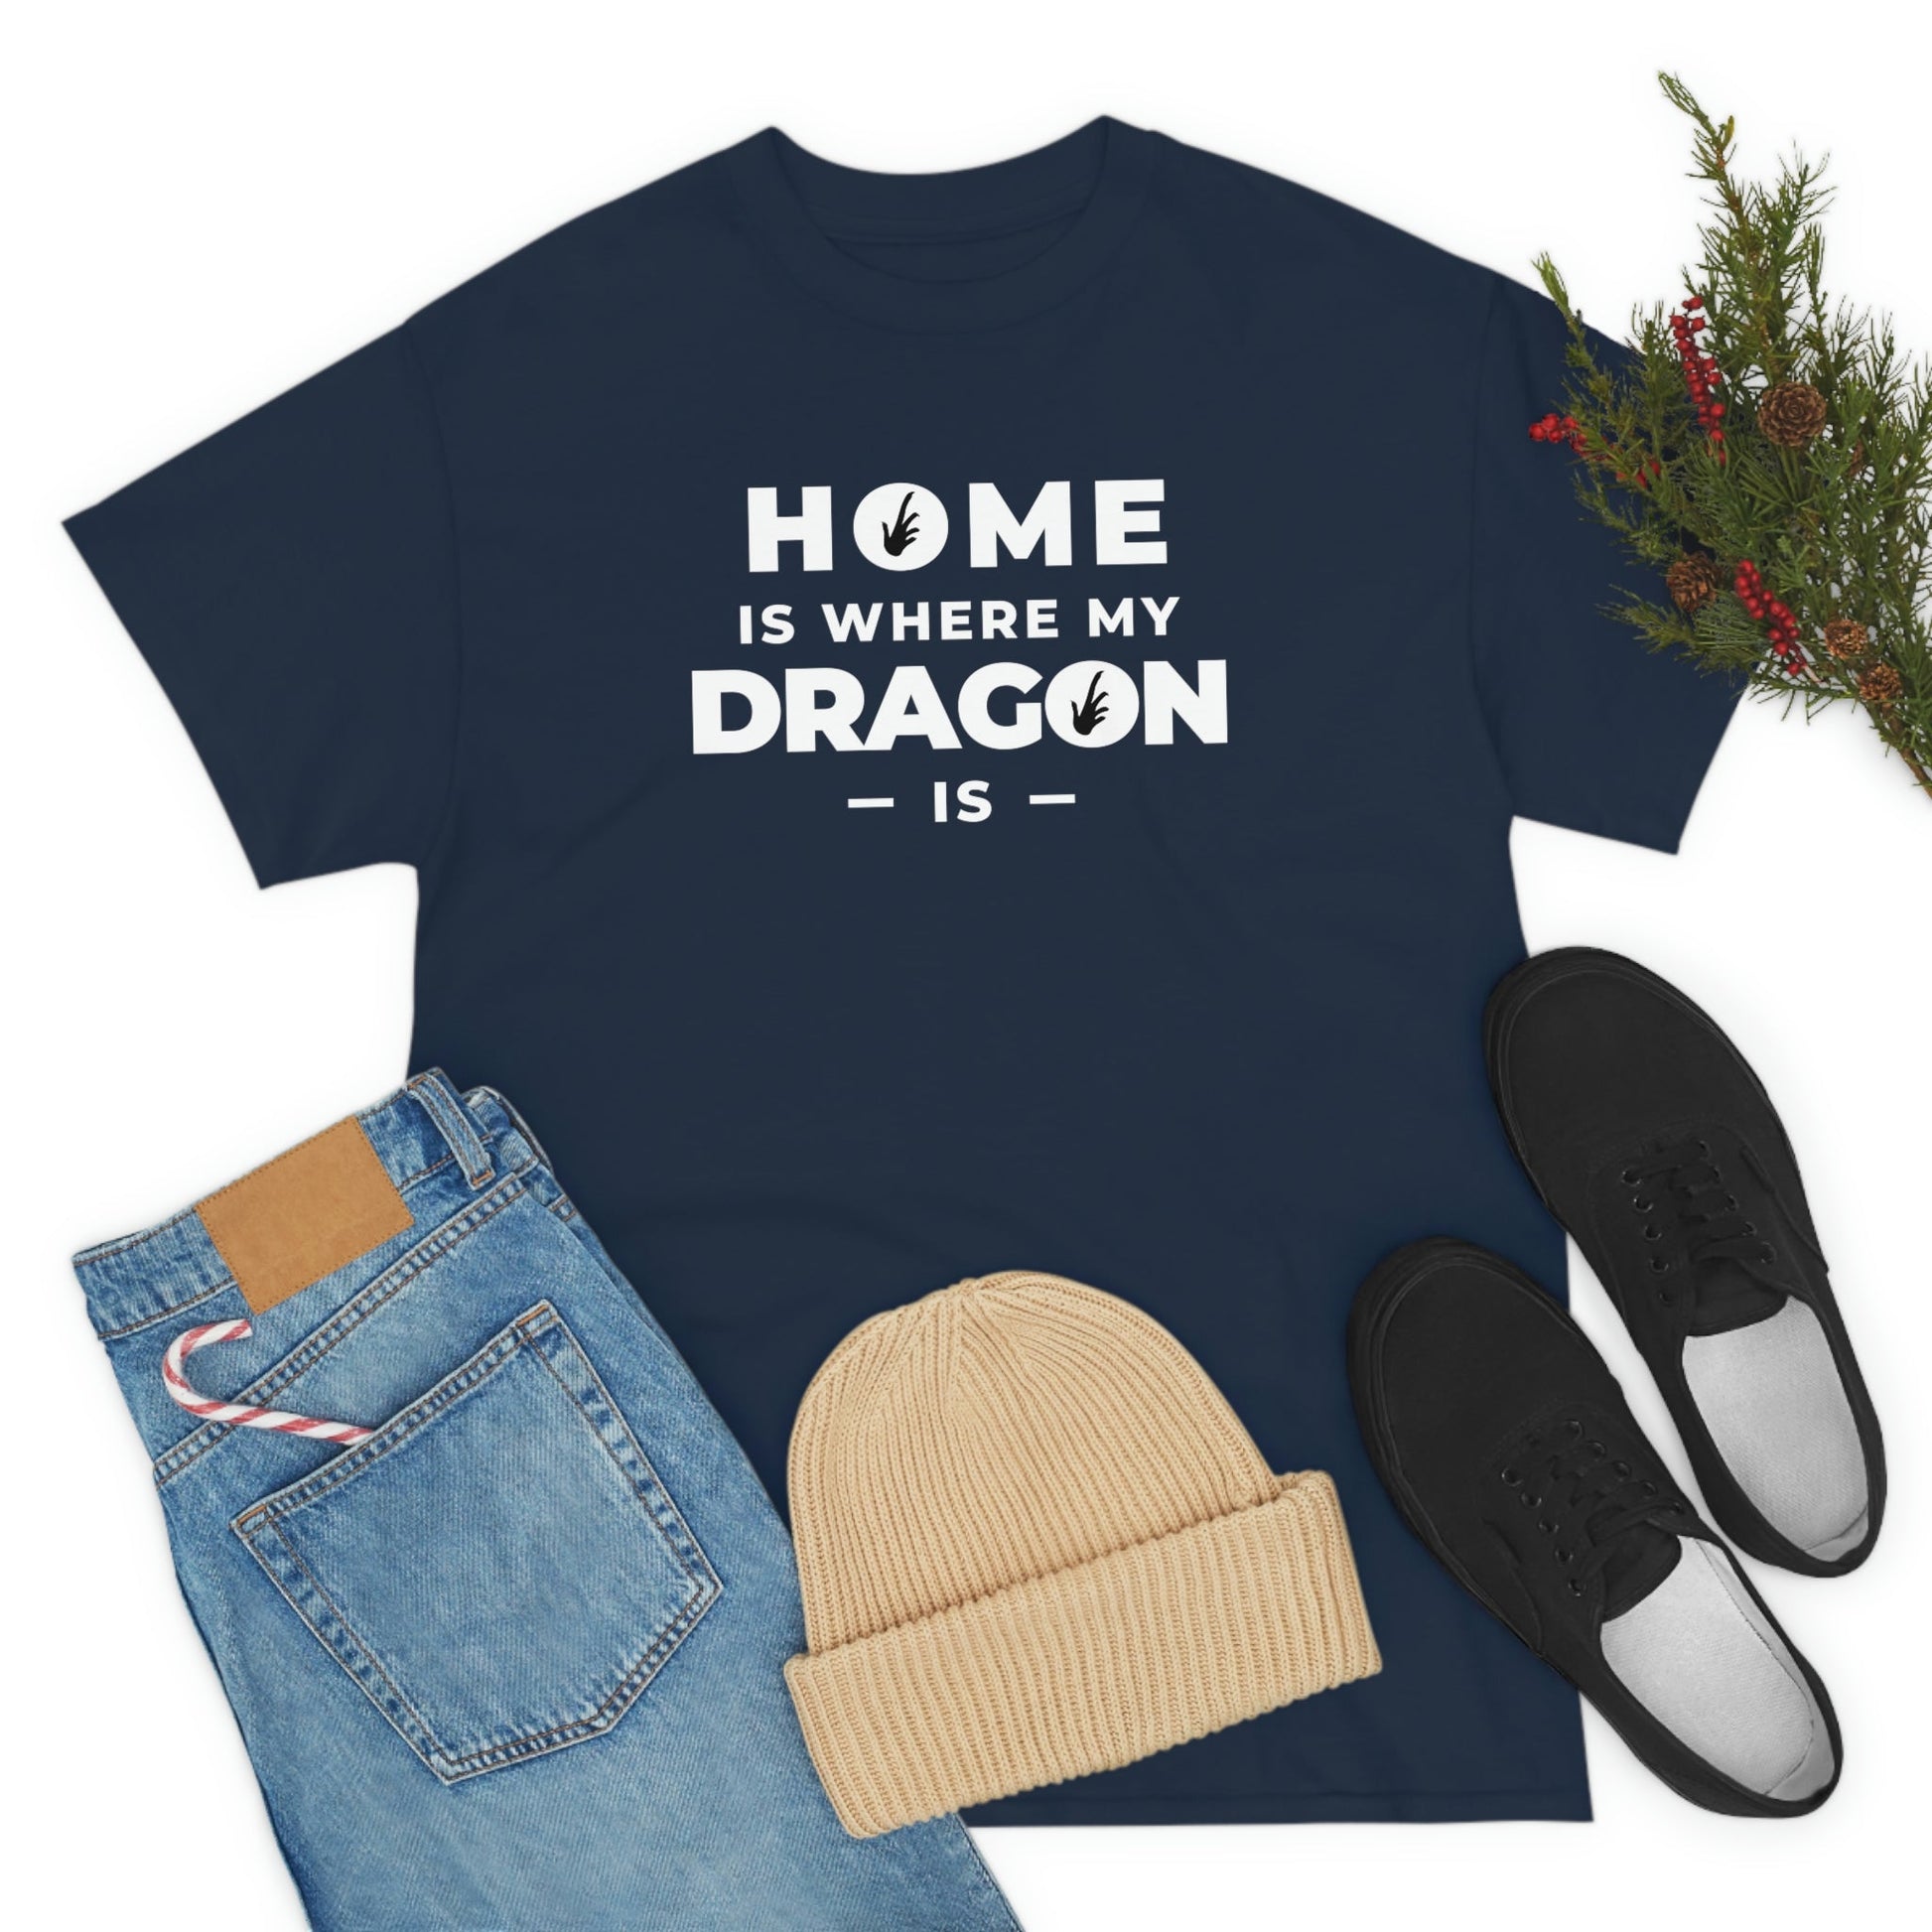 Home is Where My Dragon Is Heavy Cotton T-Shirt